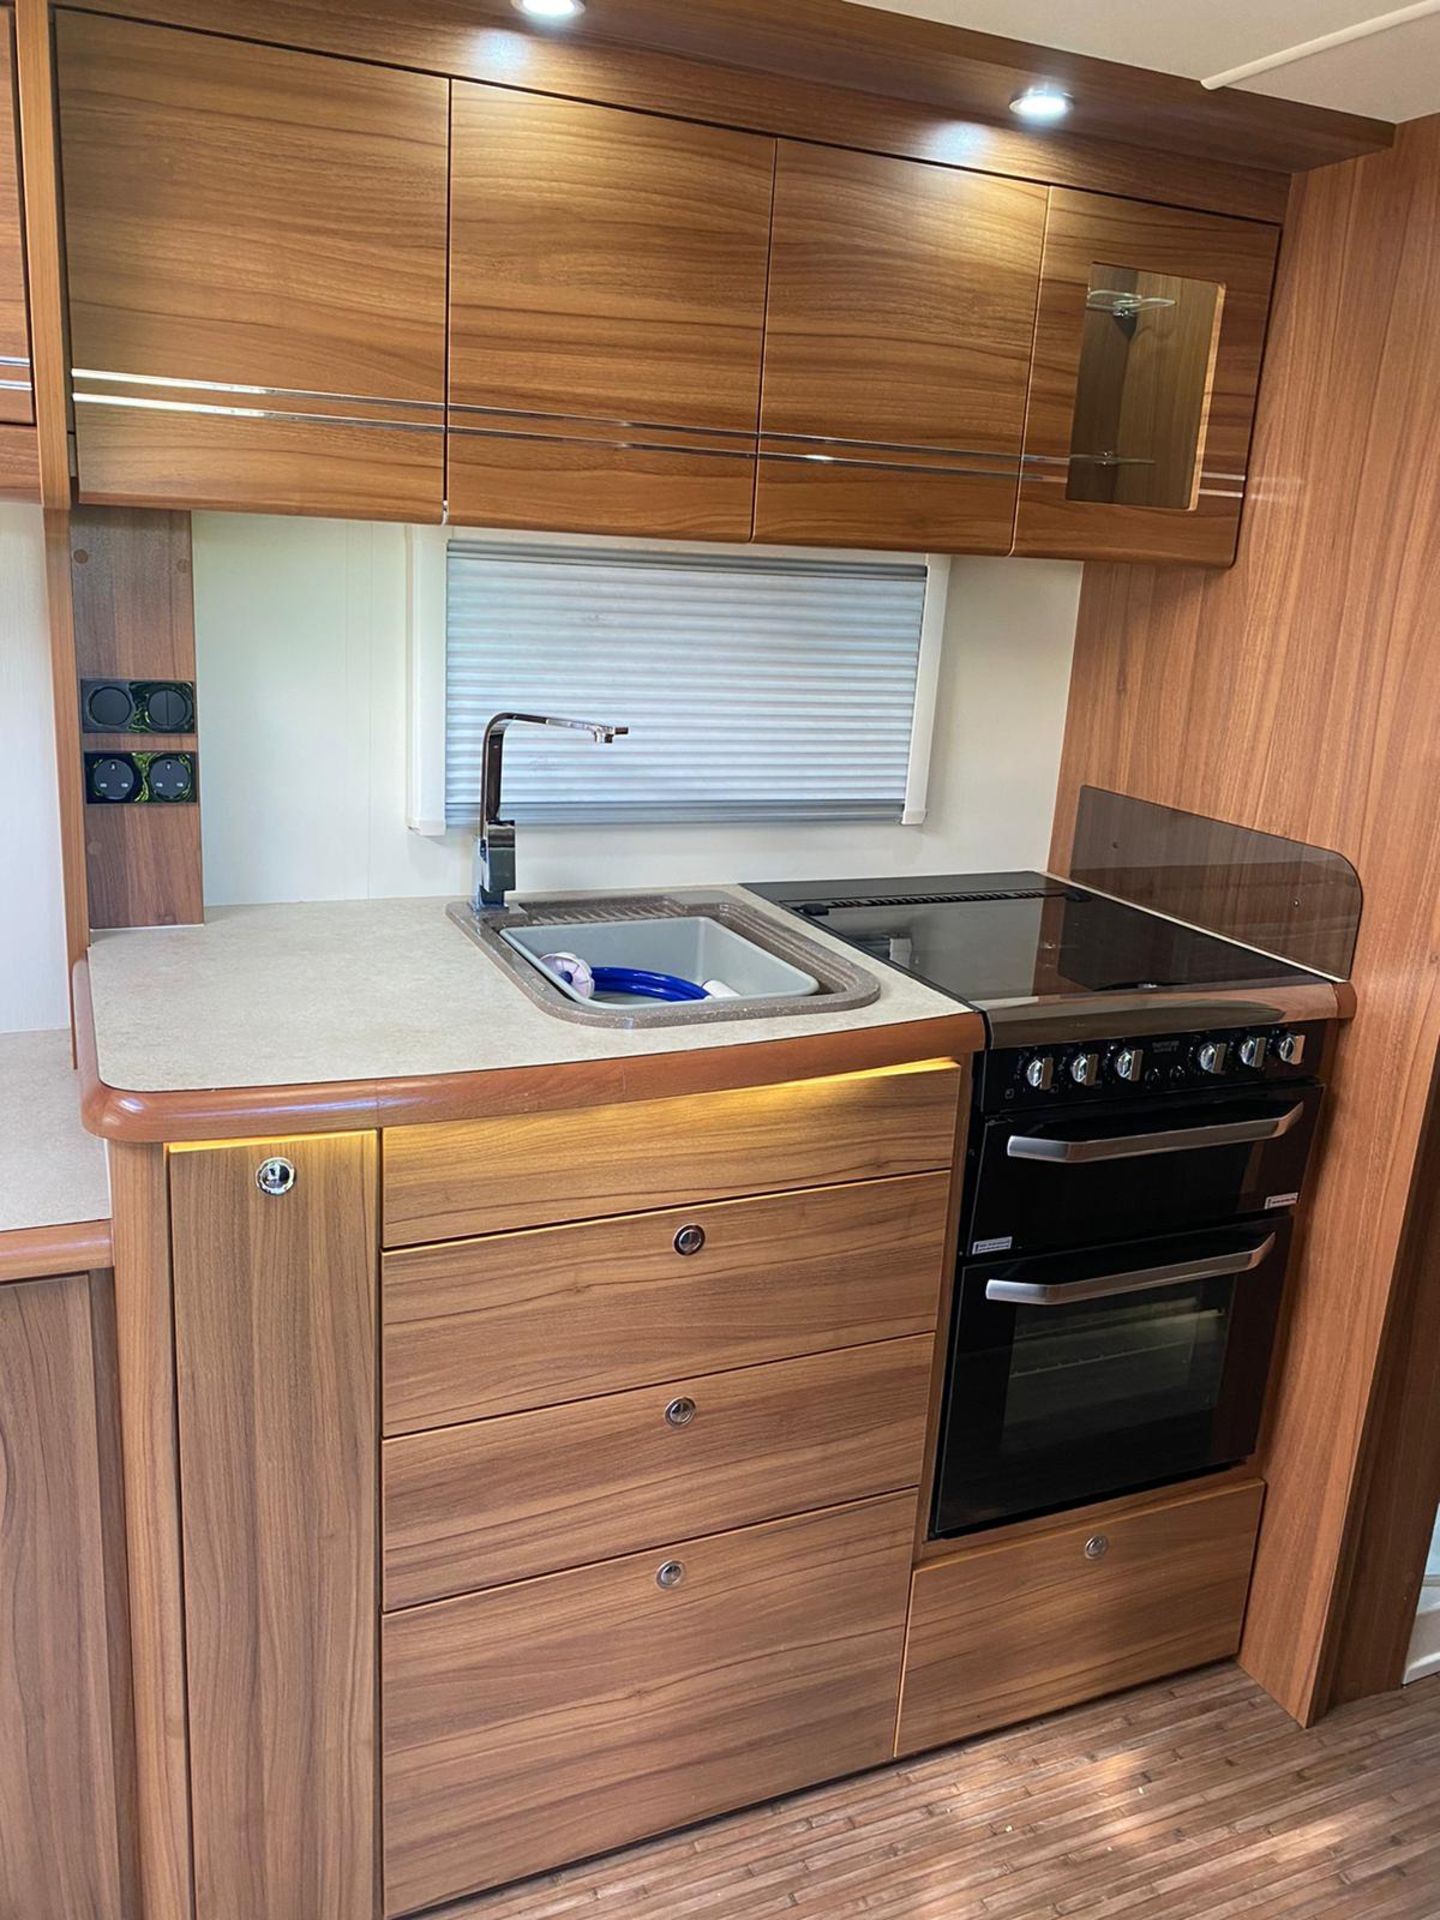 2016 BUCCANEER CARAVAN. 1 OWNER FROM NEW! LOCATION: NORTH YORKSHIRE - Image 7 of 8